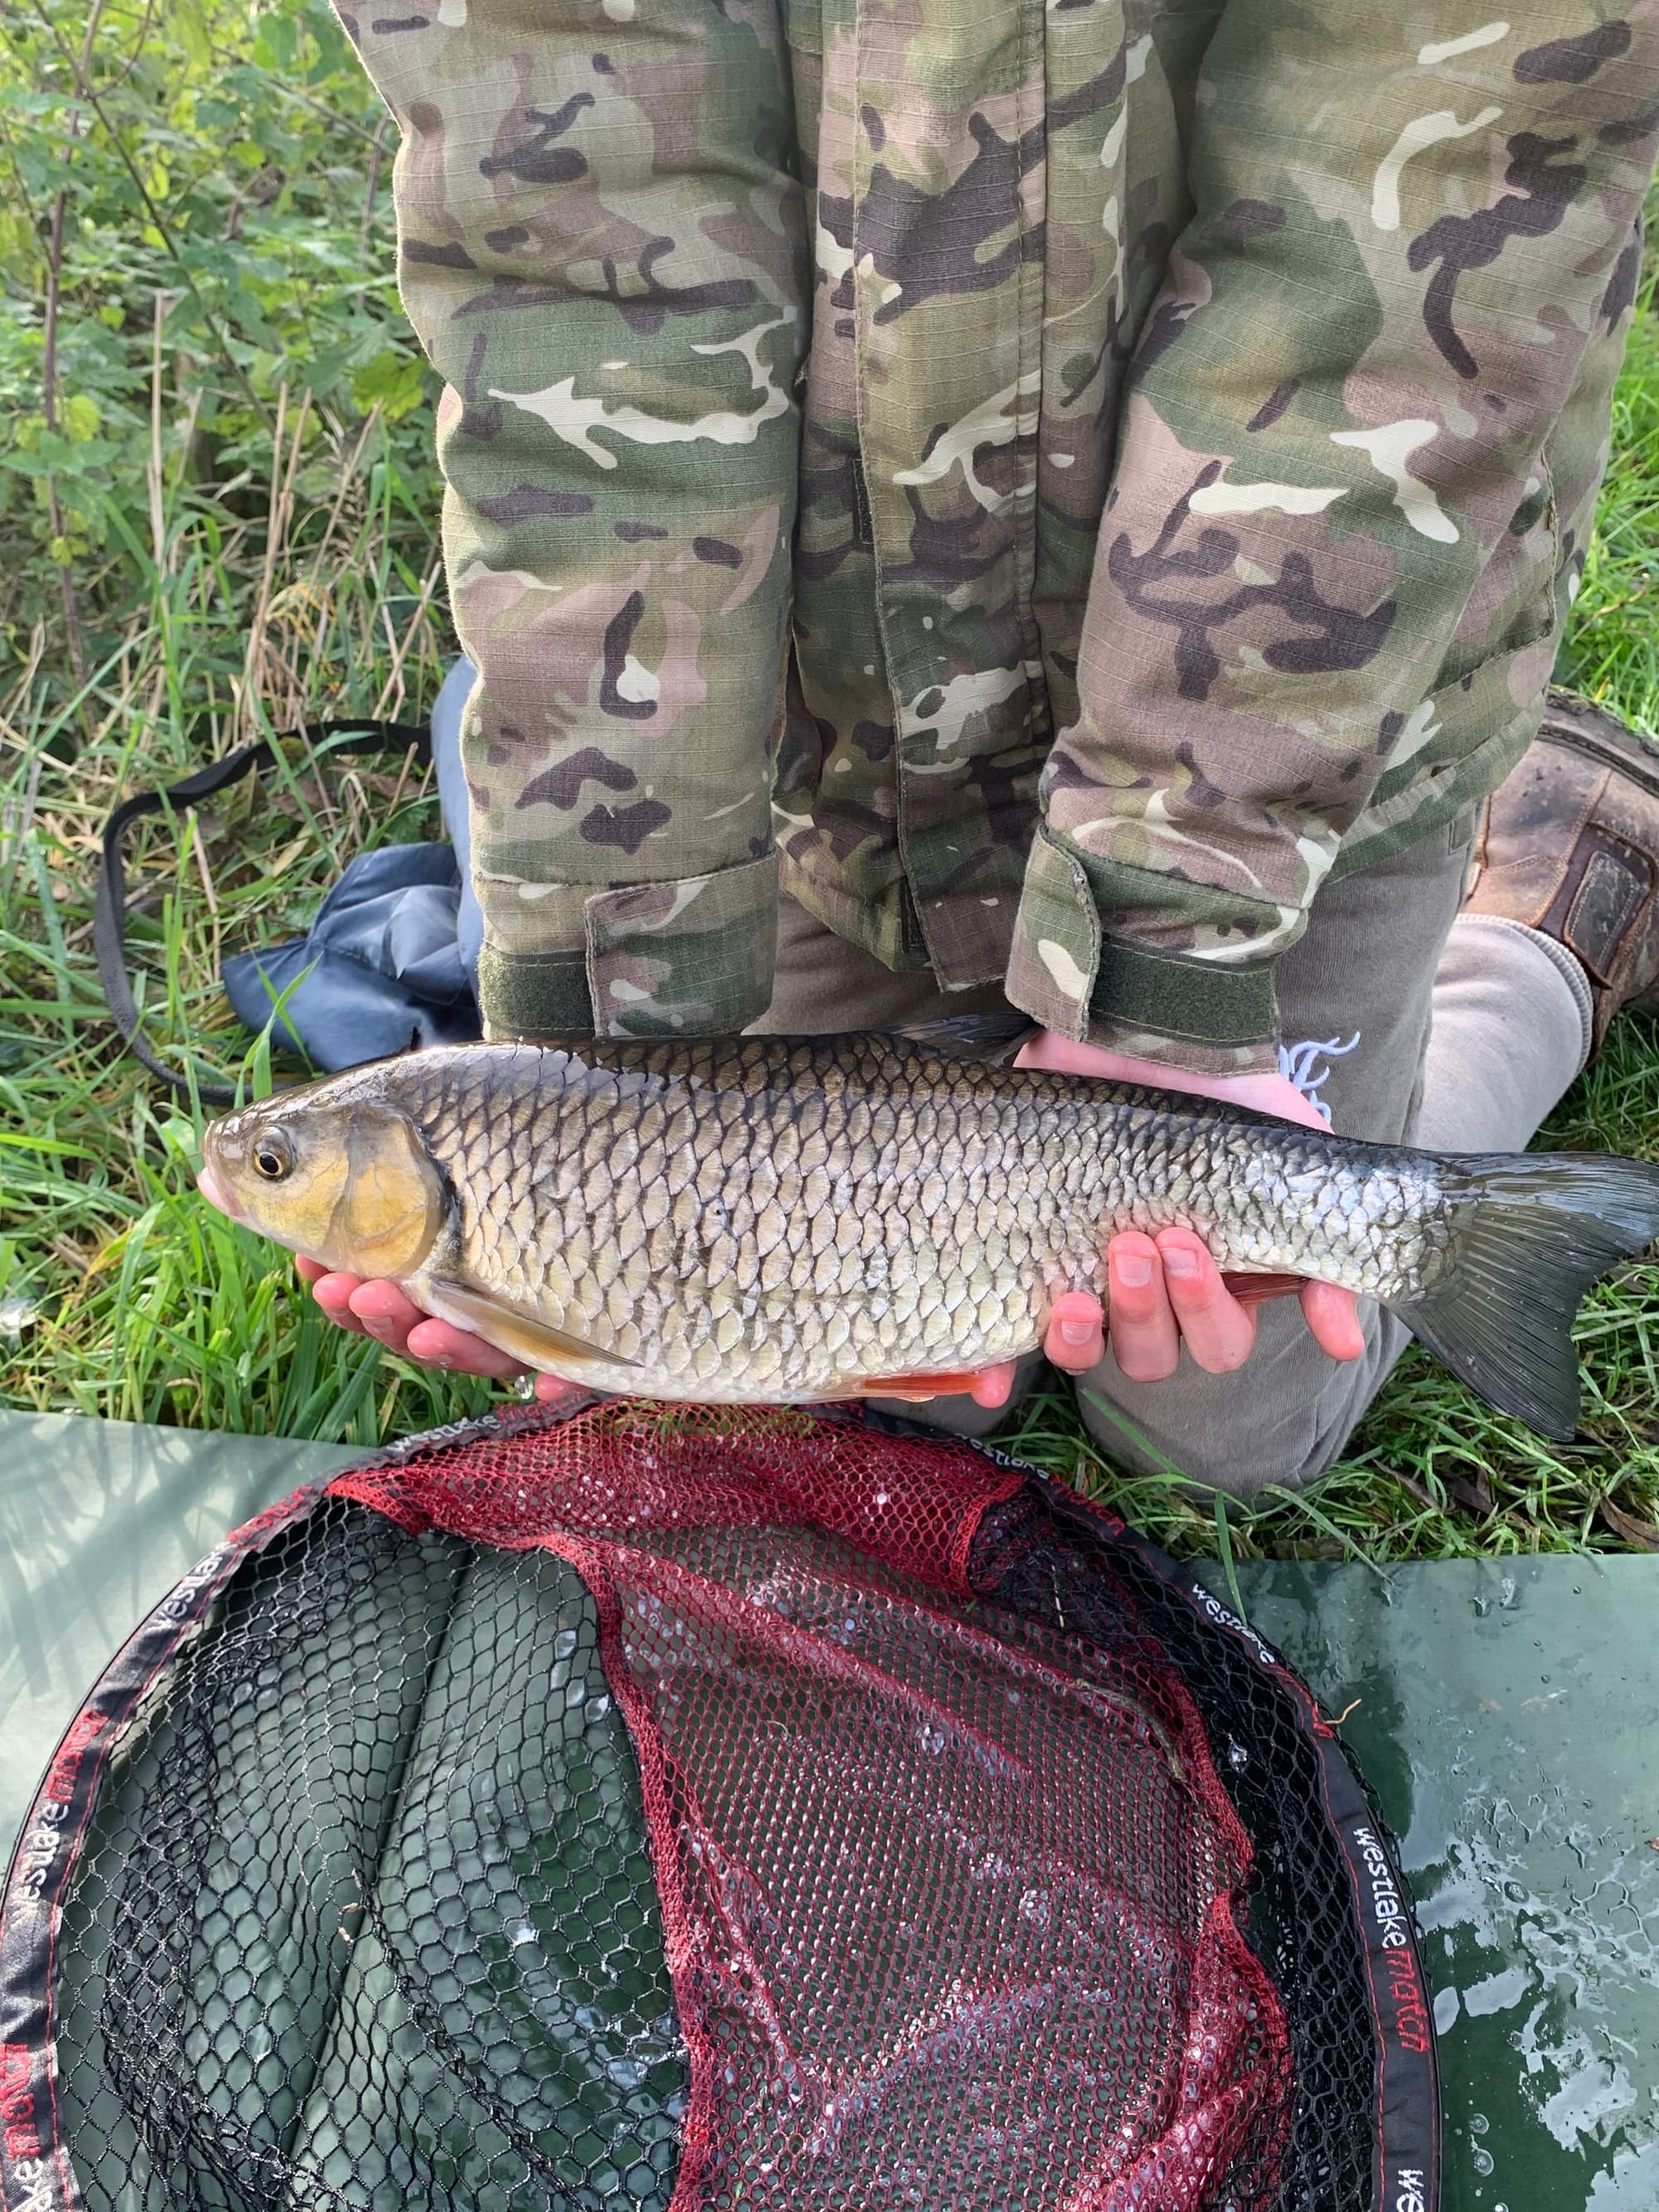 First ever Chub for Zach. Caught downstream from Stratford Mill Pool. Well done Zach, nice size!